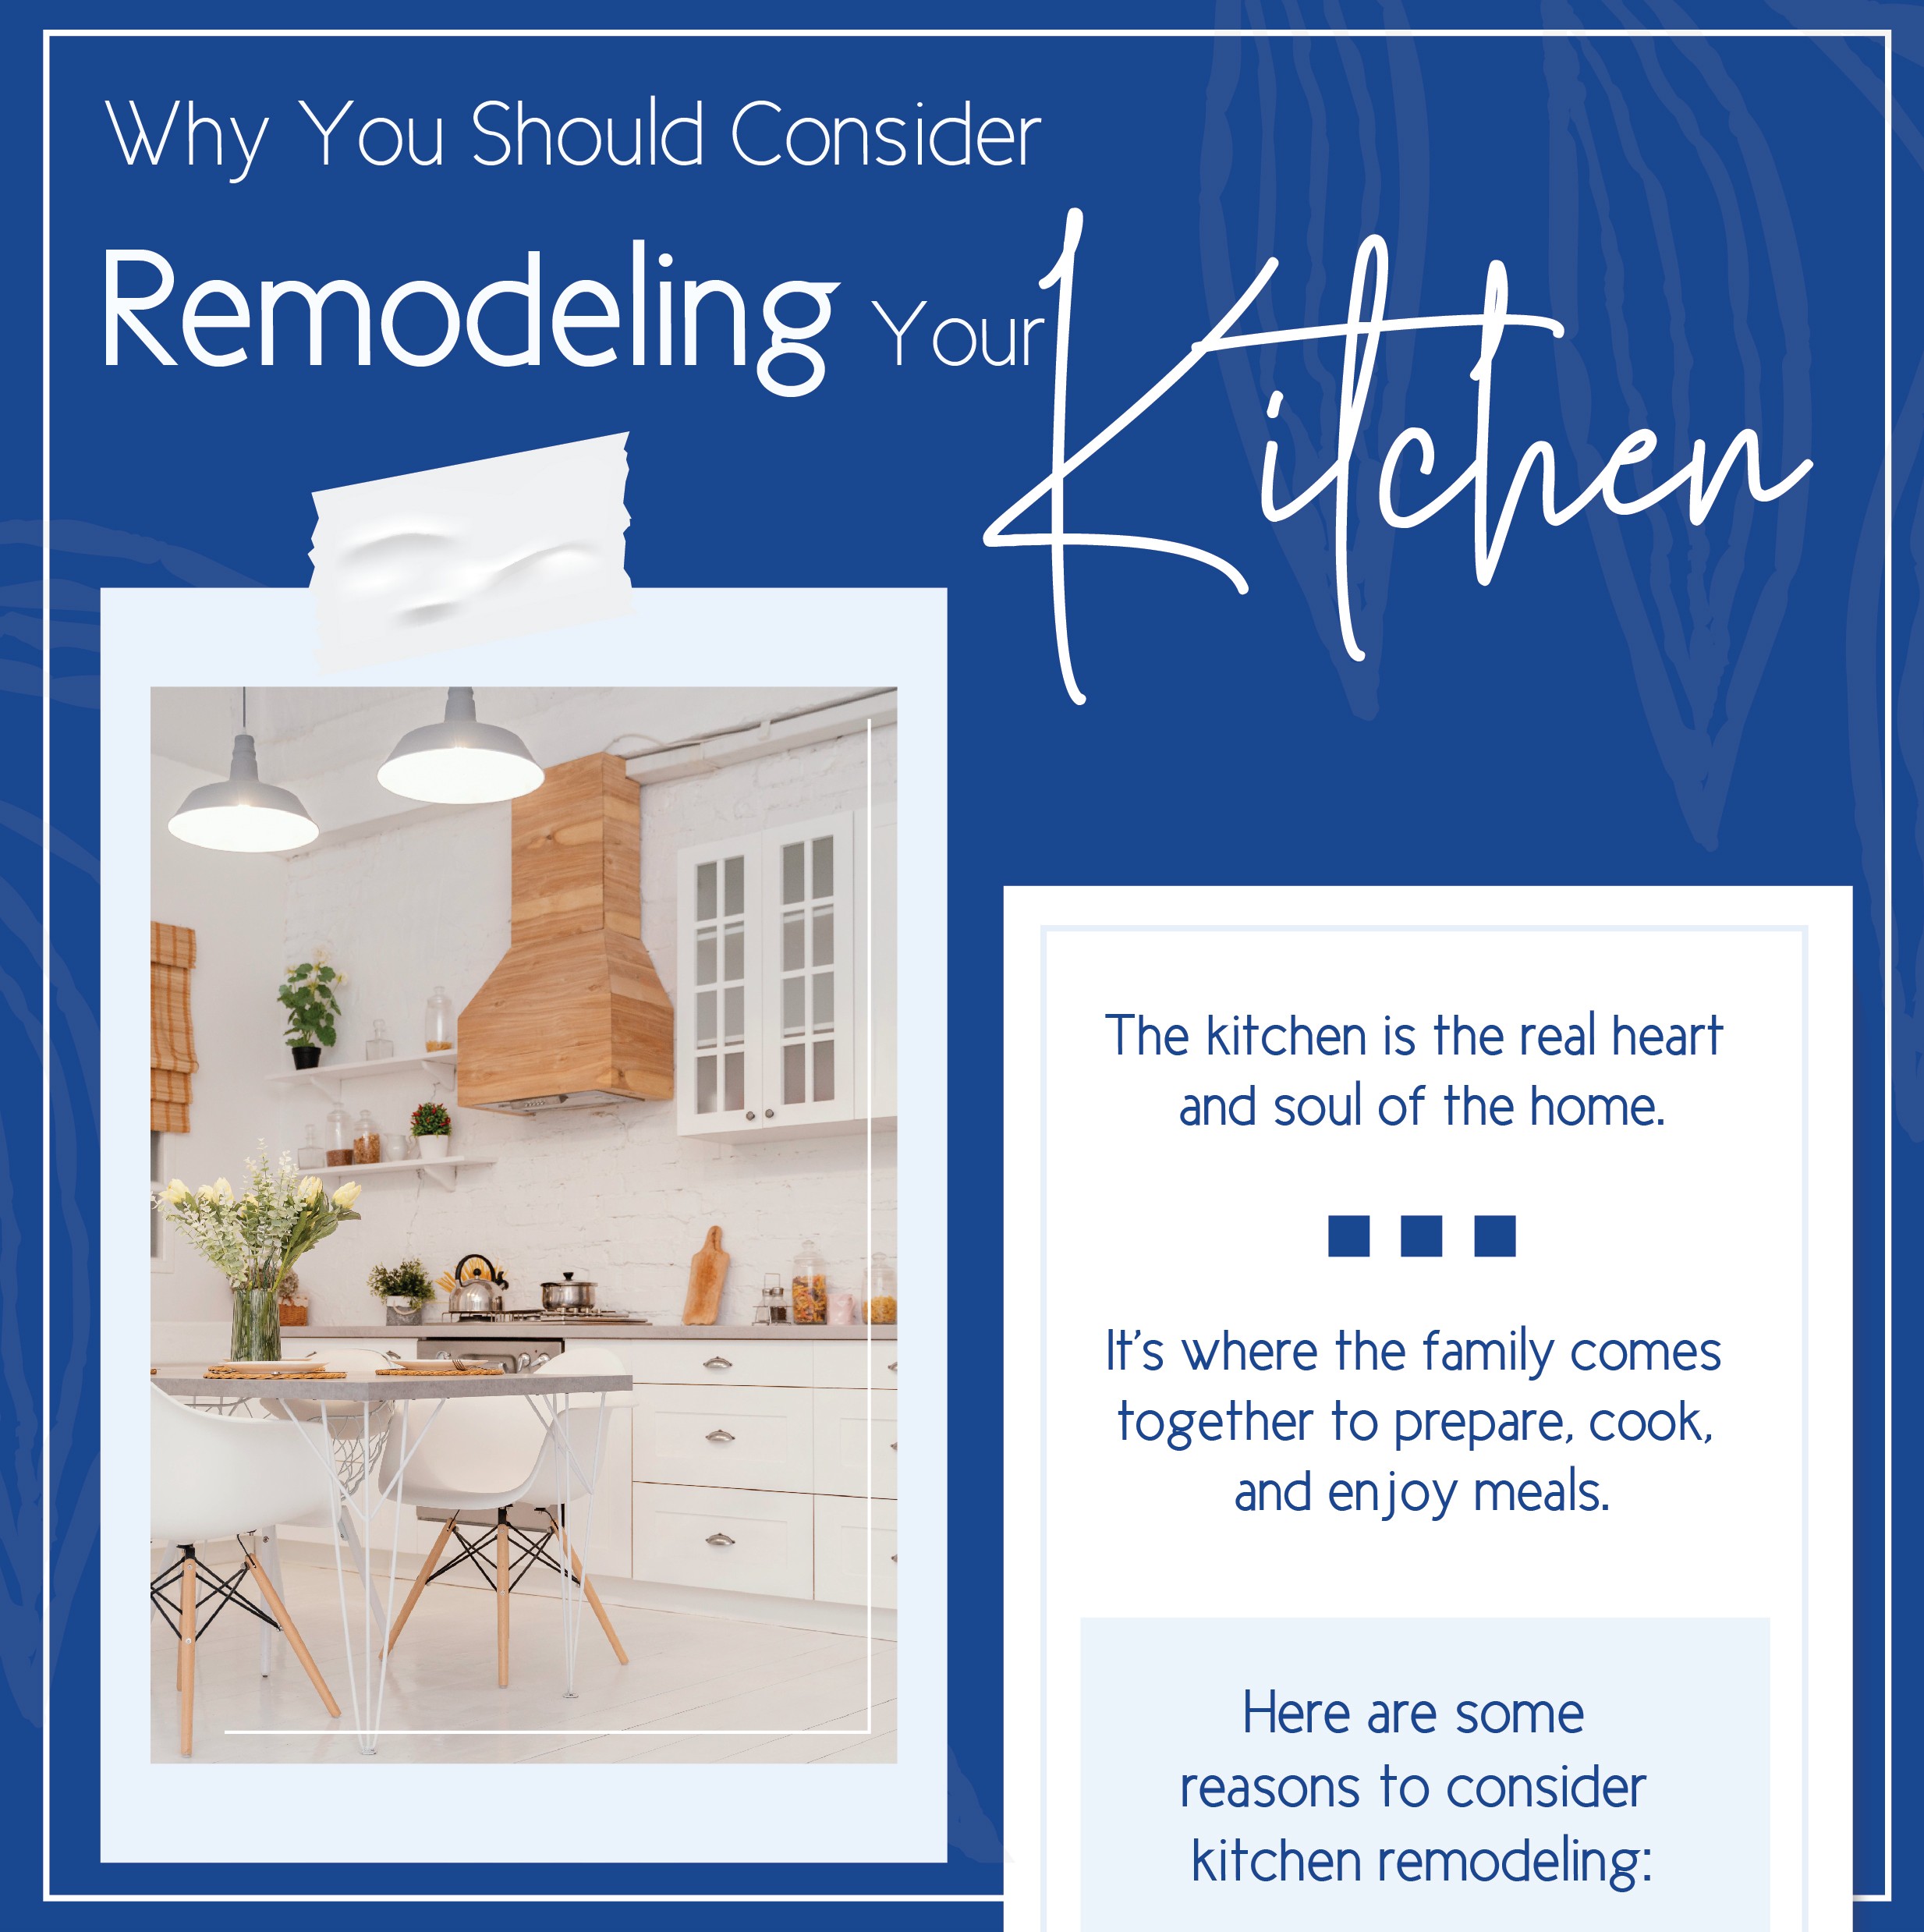 Why You Should Consider Remodeling Your Kitchen